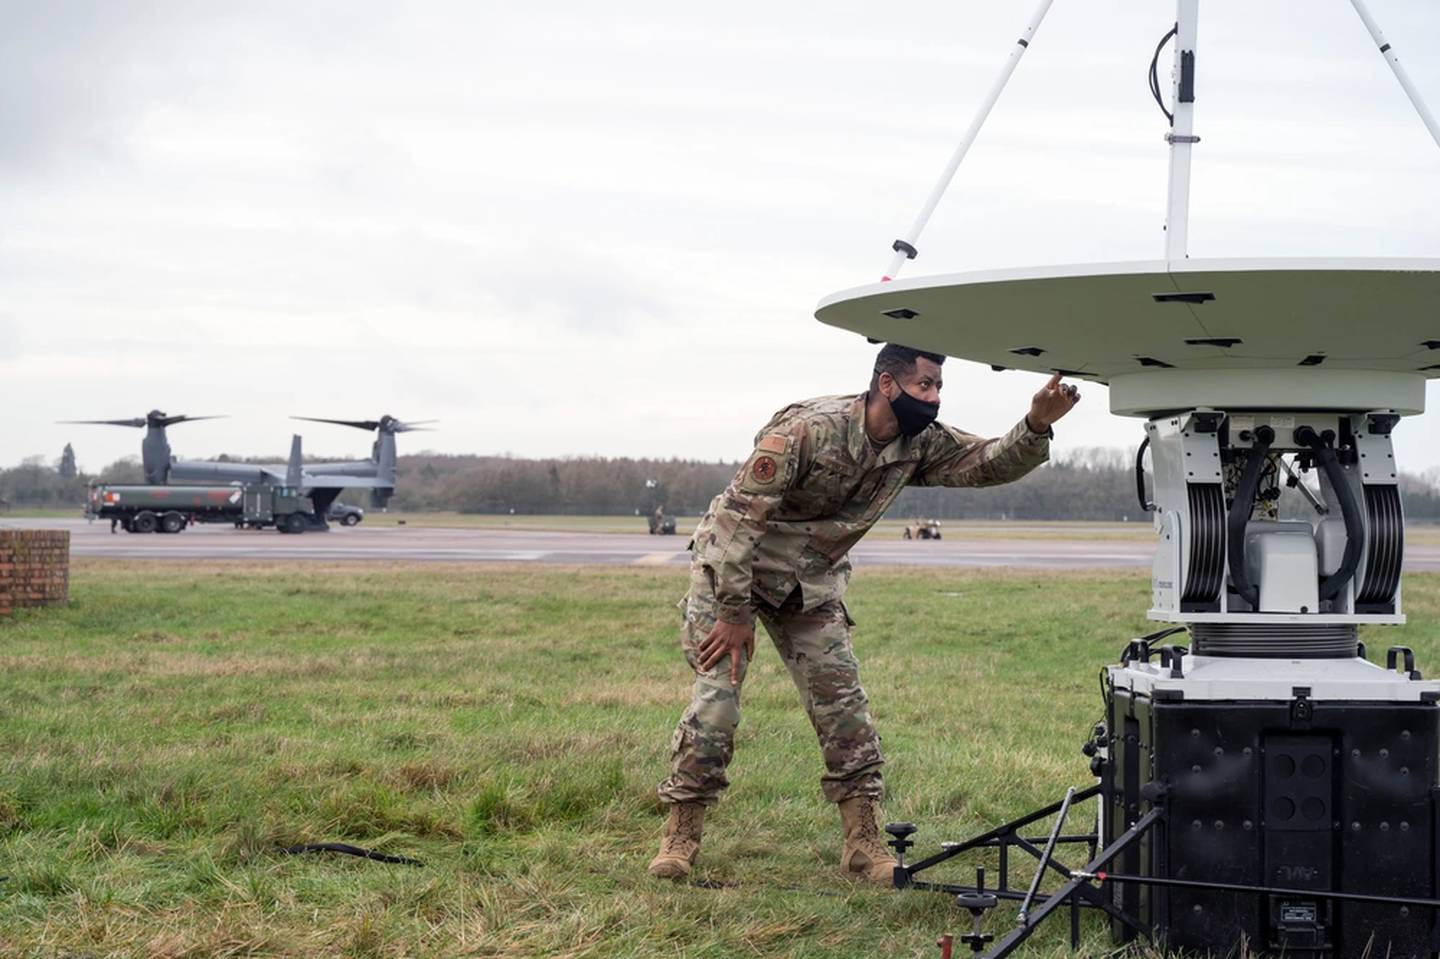 A 352nd Special Operations Support Squadron communications airman checks the connections to the unit's satellite link during exercise Epic Totem at RAF Fairford, United Kingdom, Jan. 11, 2022. The satellite is vital to communications, web and network usage of all personnel deployed from the 352nd Special Operations Wing. (Staff Sgt. Jeremy McGuffin/Air Force)